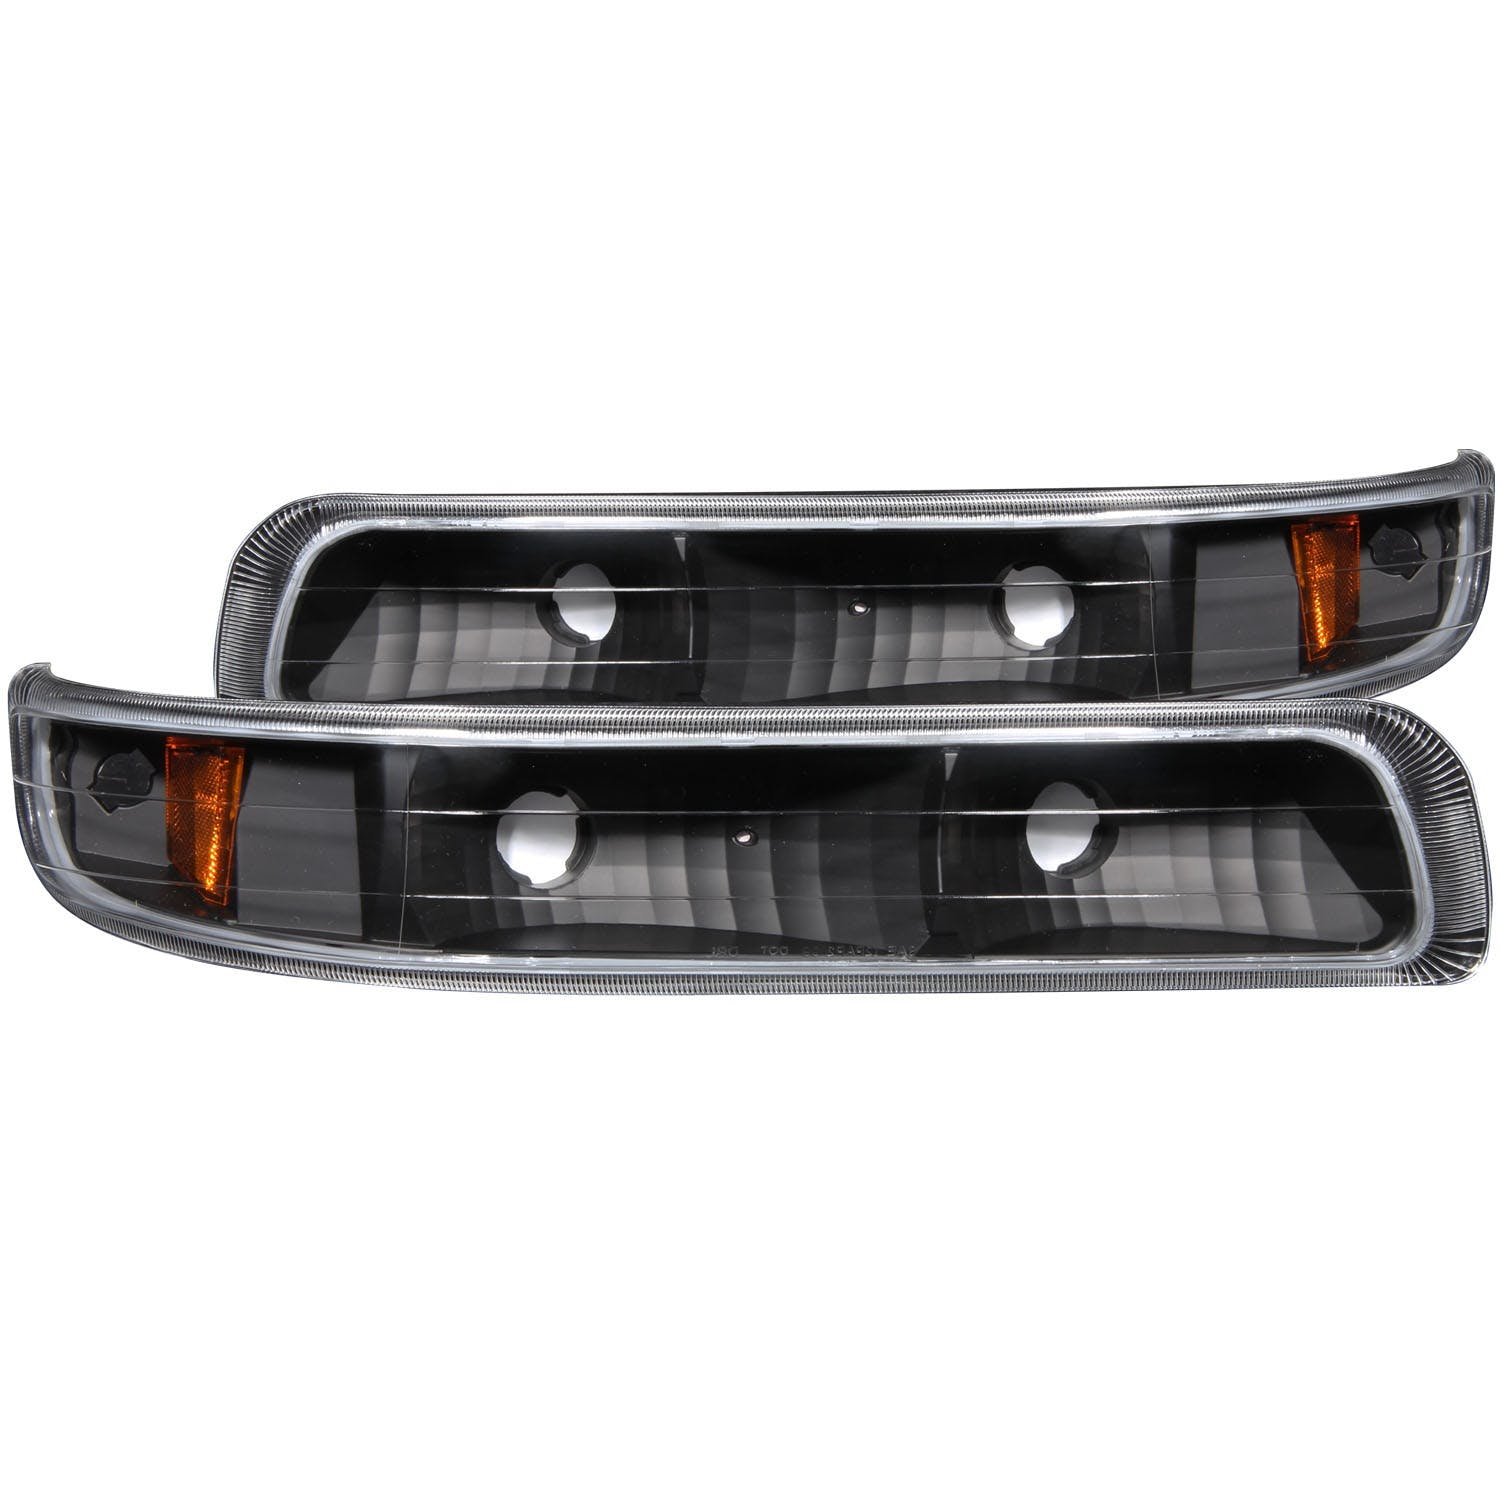 AnzoUSA 511065 Euro Parking Lights Black with Amber Reflector